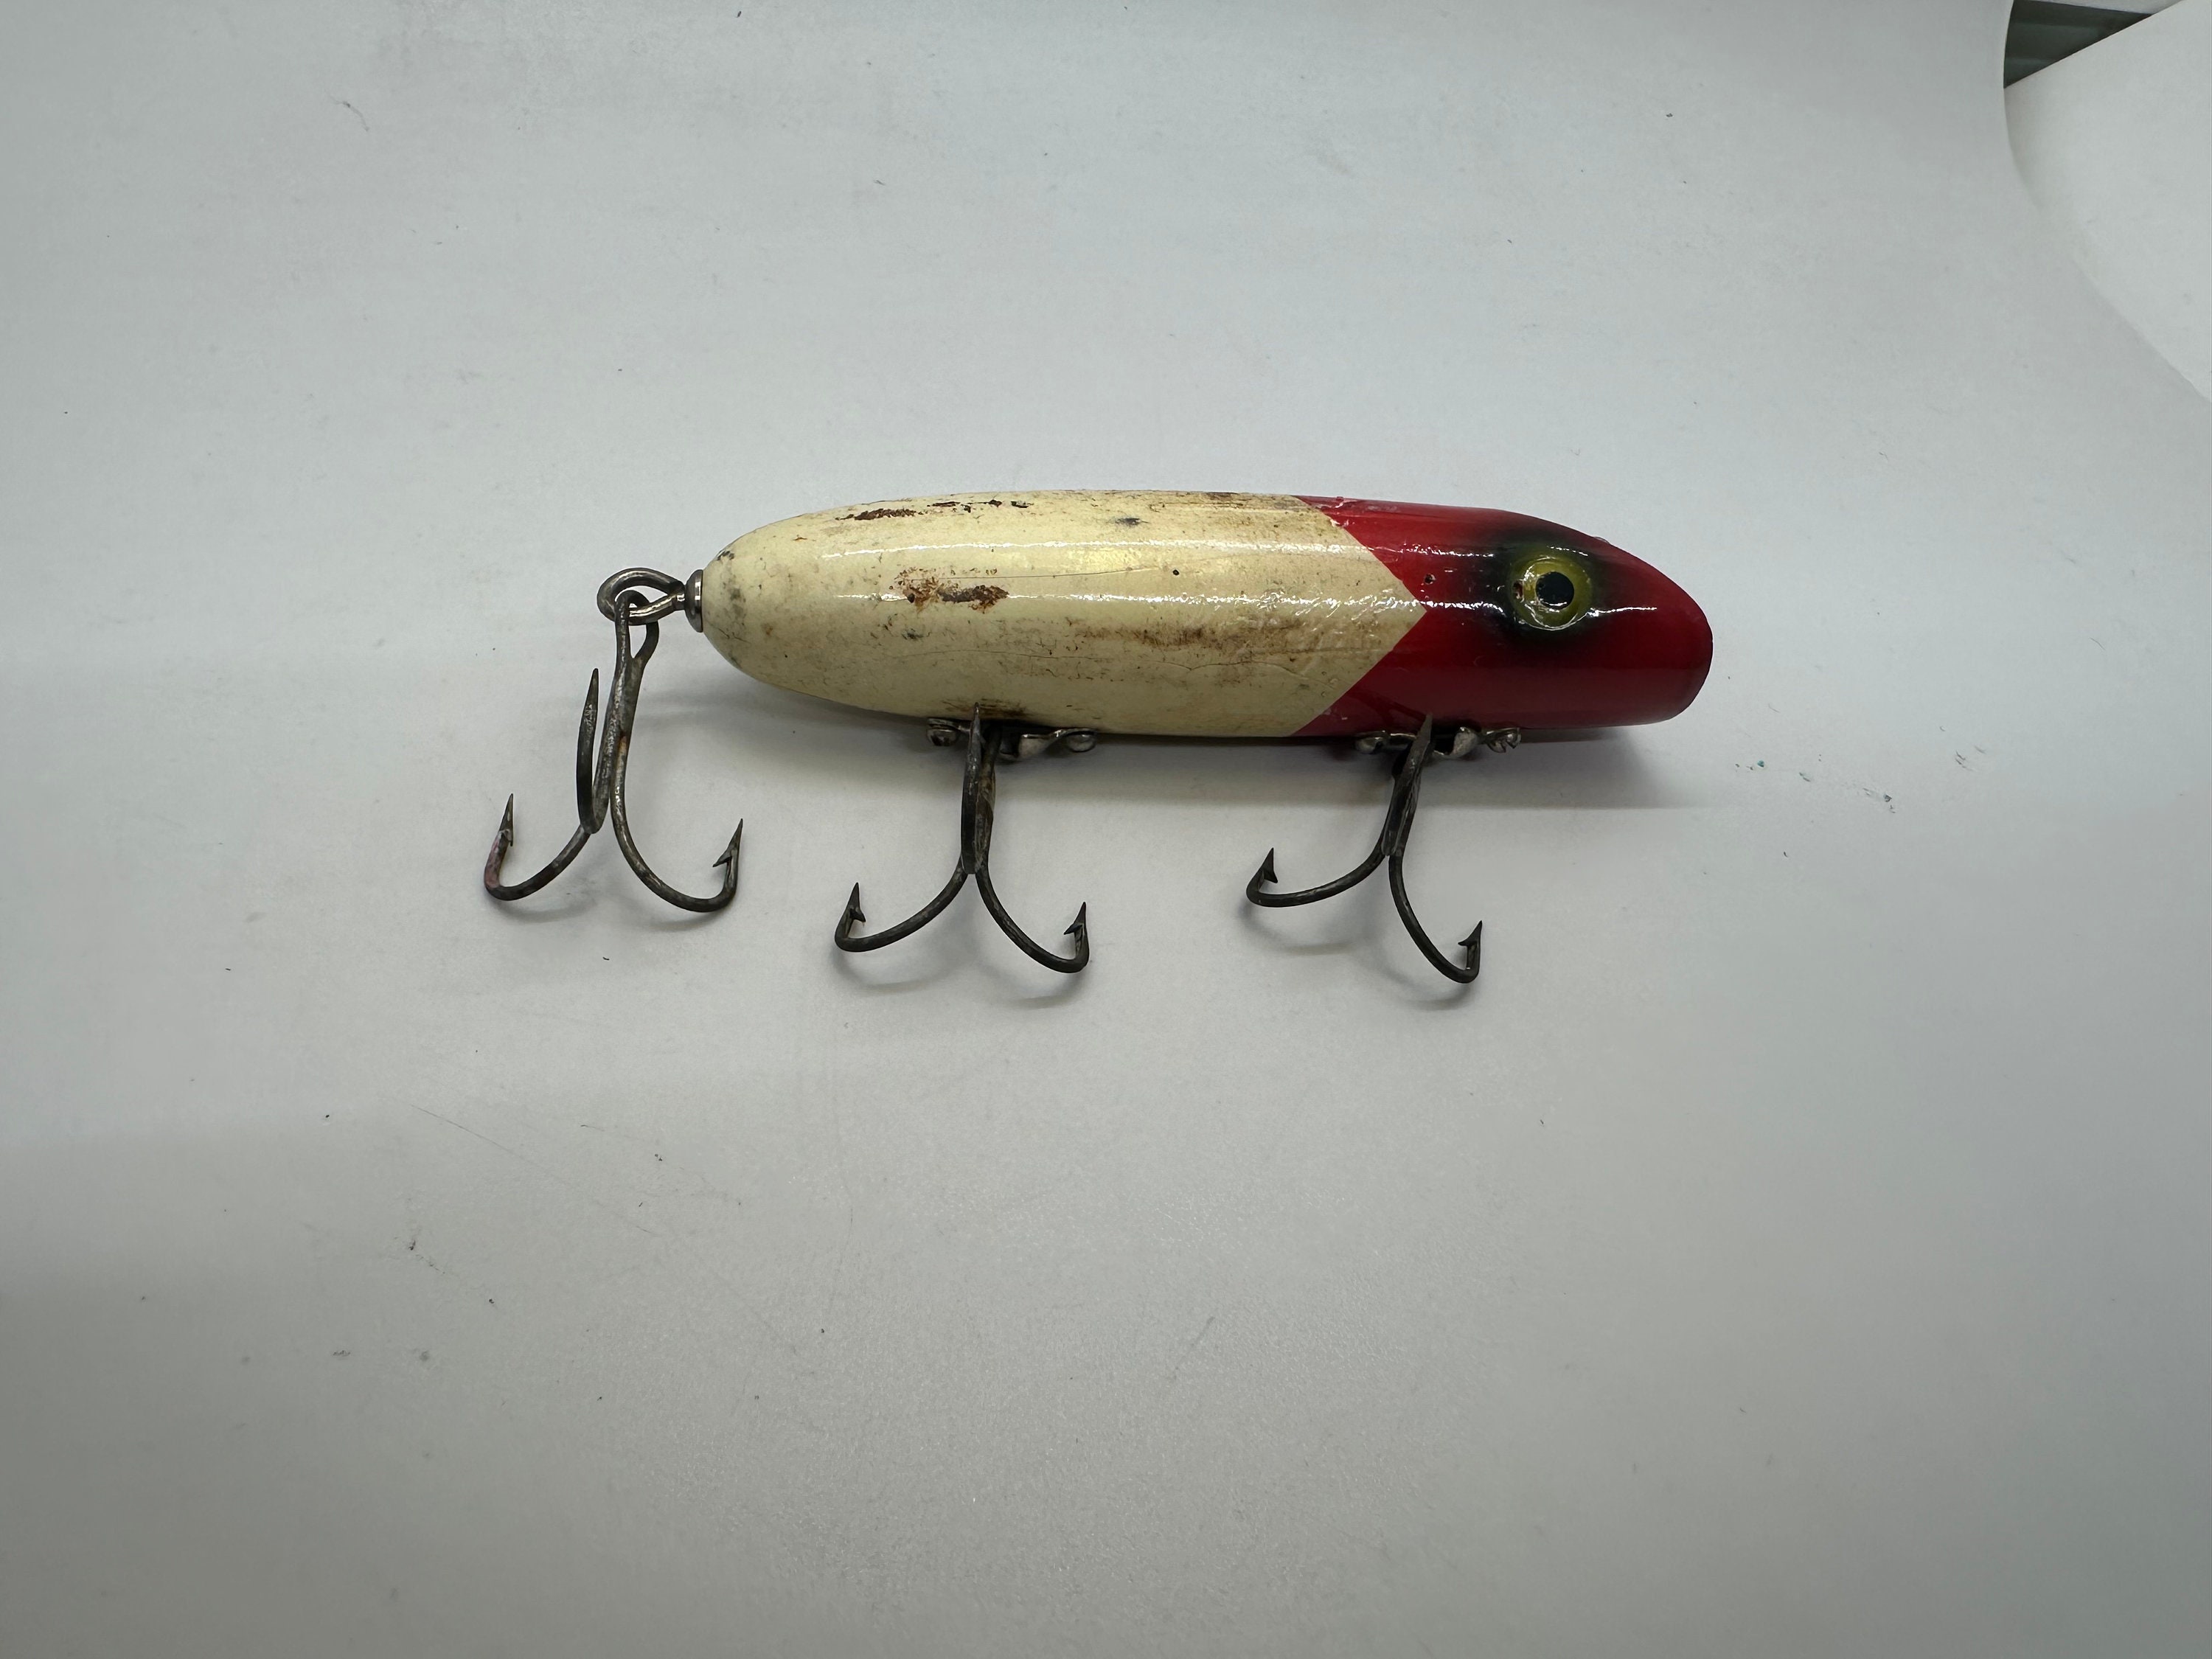 South Bend Lure 